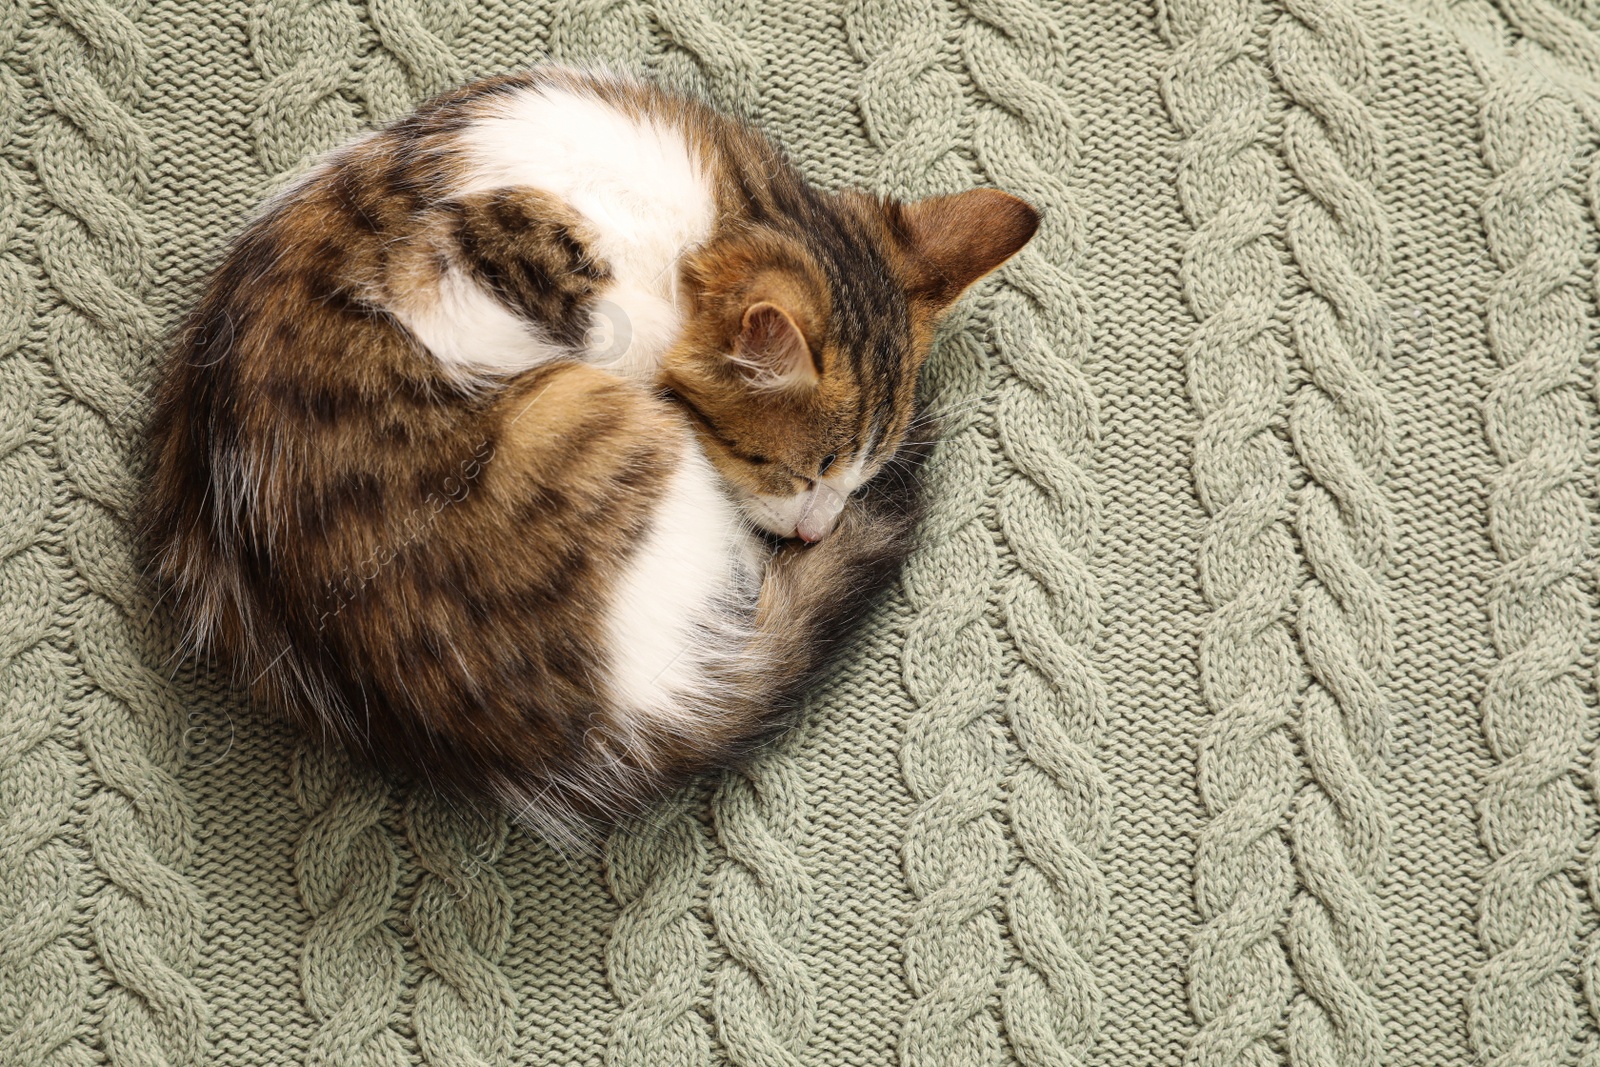 Photo of Cute kitten curled up on knitted plaid, top view with space for text. Baby animal